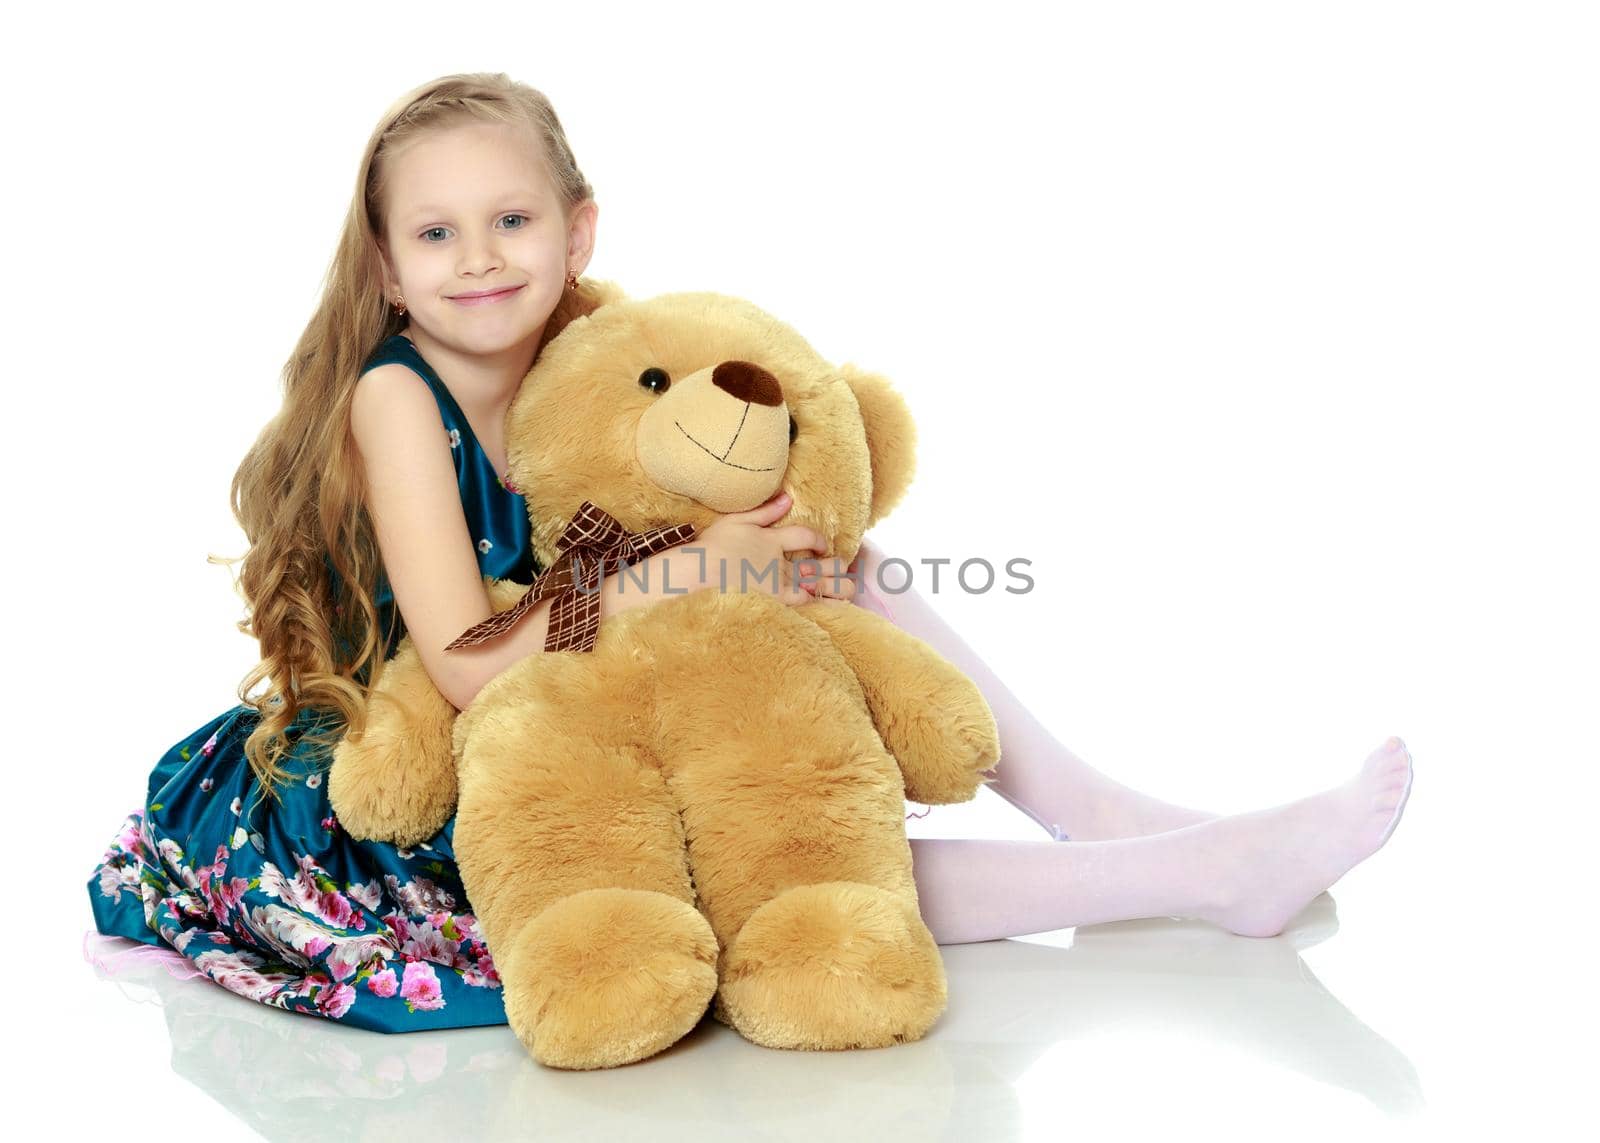 Beautiful little girl with long blond hair in a smart blue dress. The girl hugs a large teddy bear.